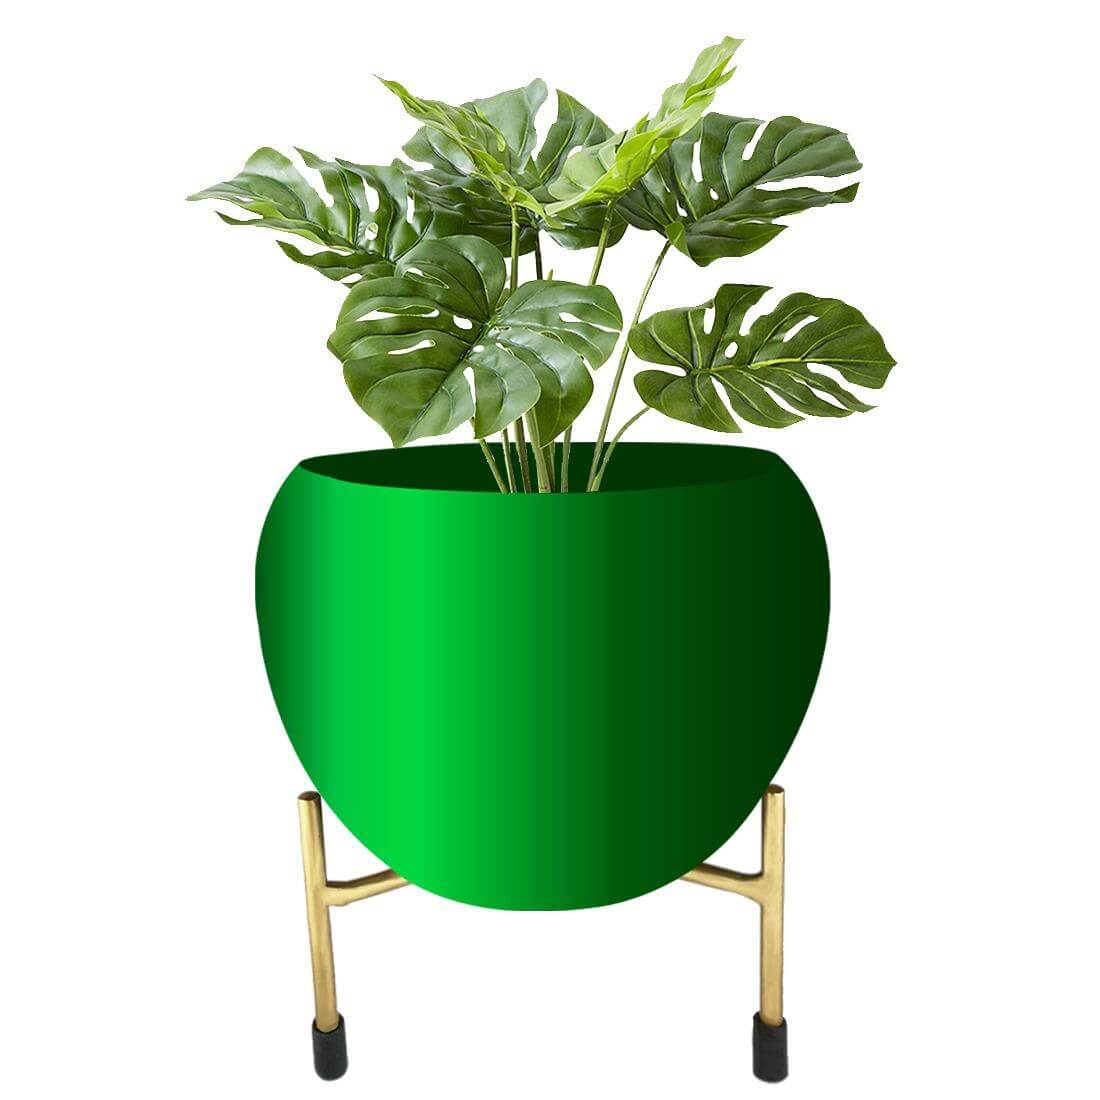 APPLE DESIGN FLOWER POT GREEN WITH STAND